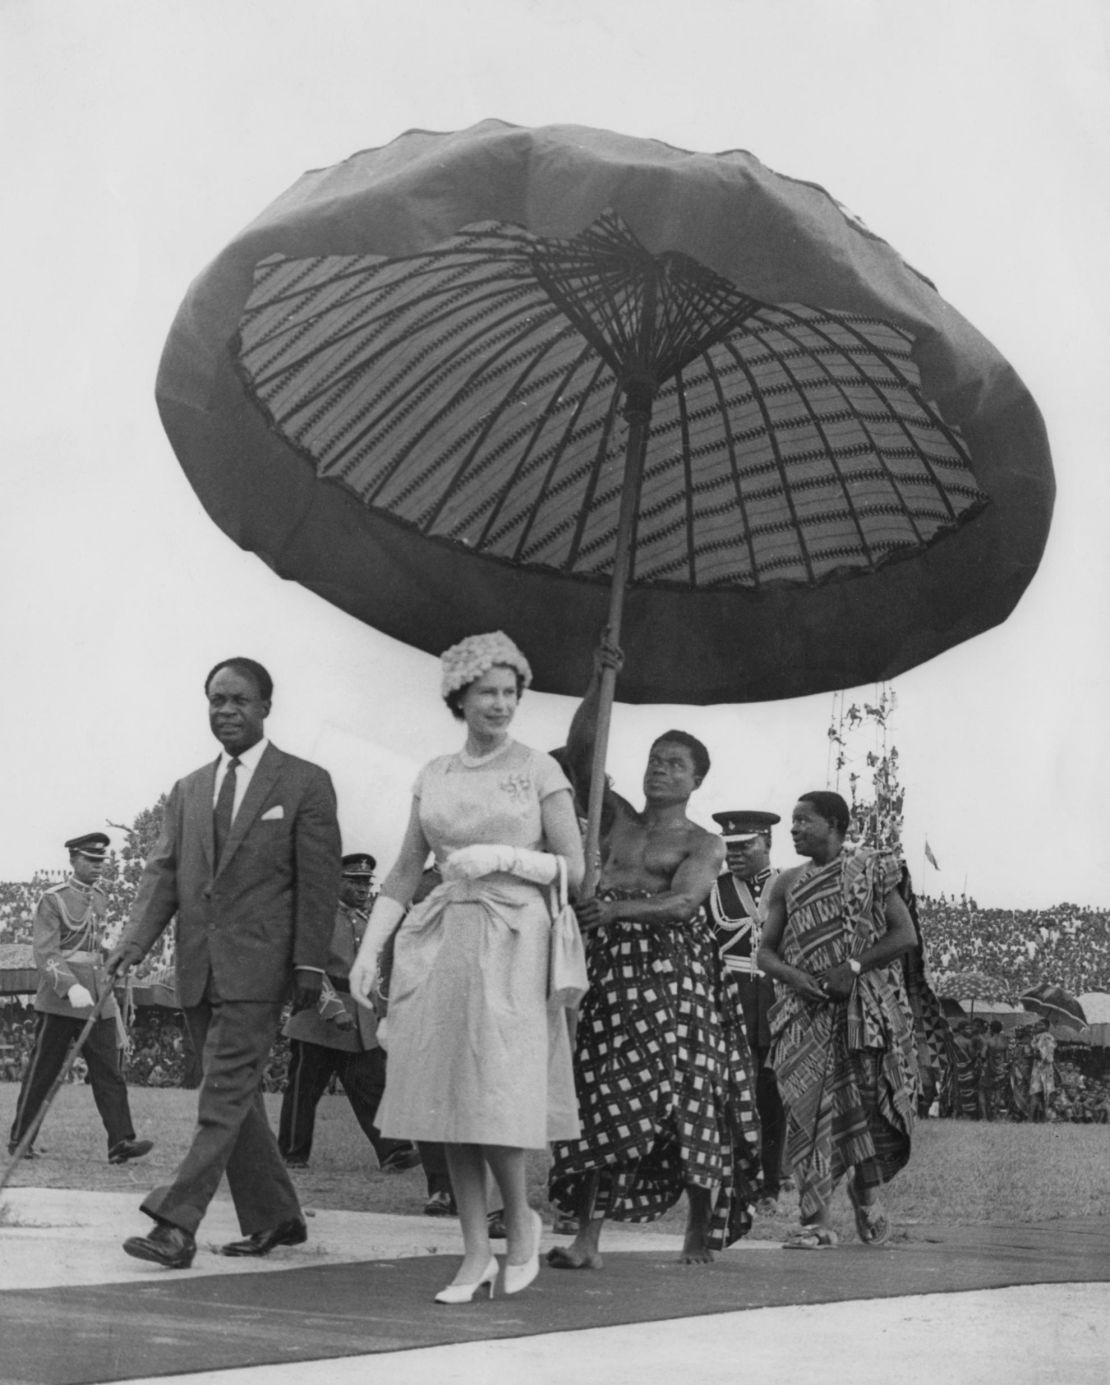 Queen Elizabeth II on her way to the Kumasi Durbah with Kwame Nkrumah, President of Ghana, during her tour of Ghana, November 1961.